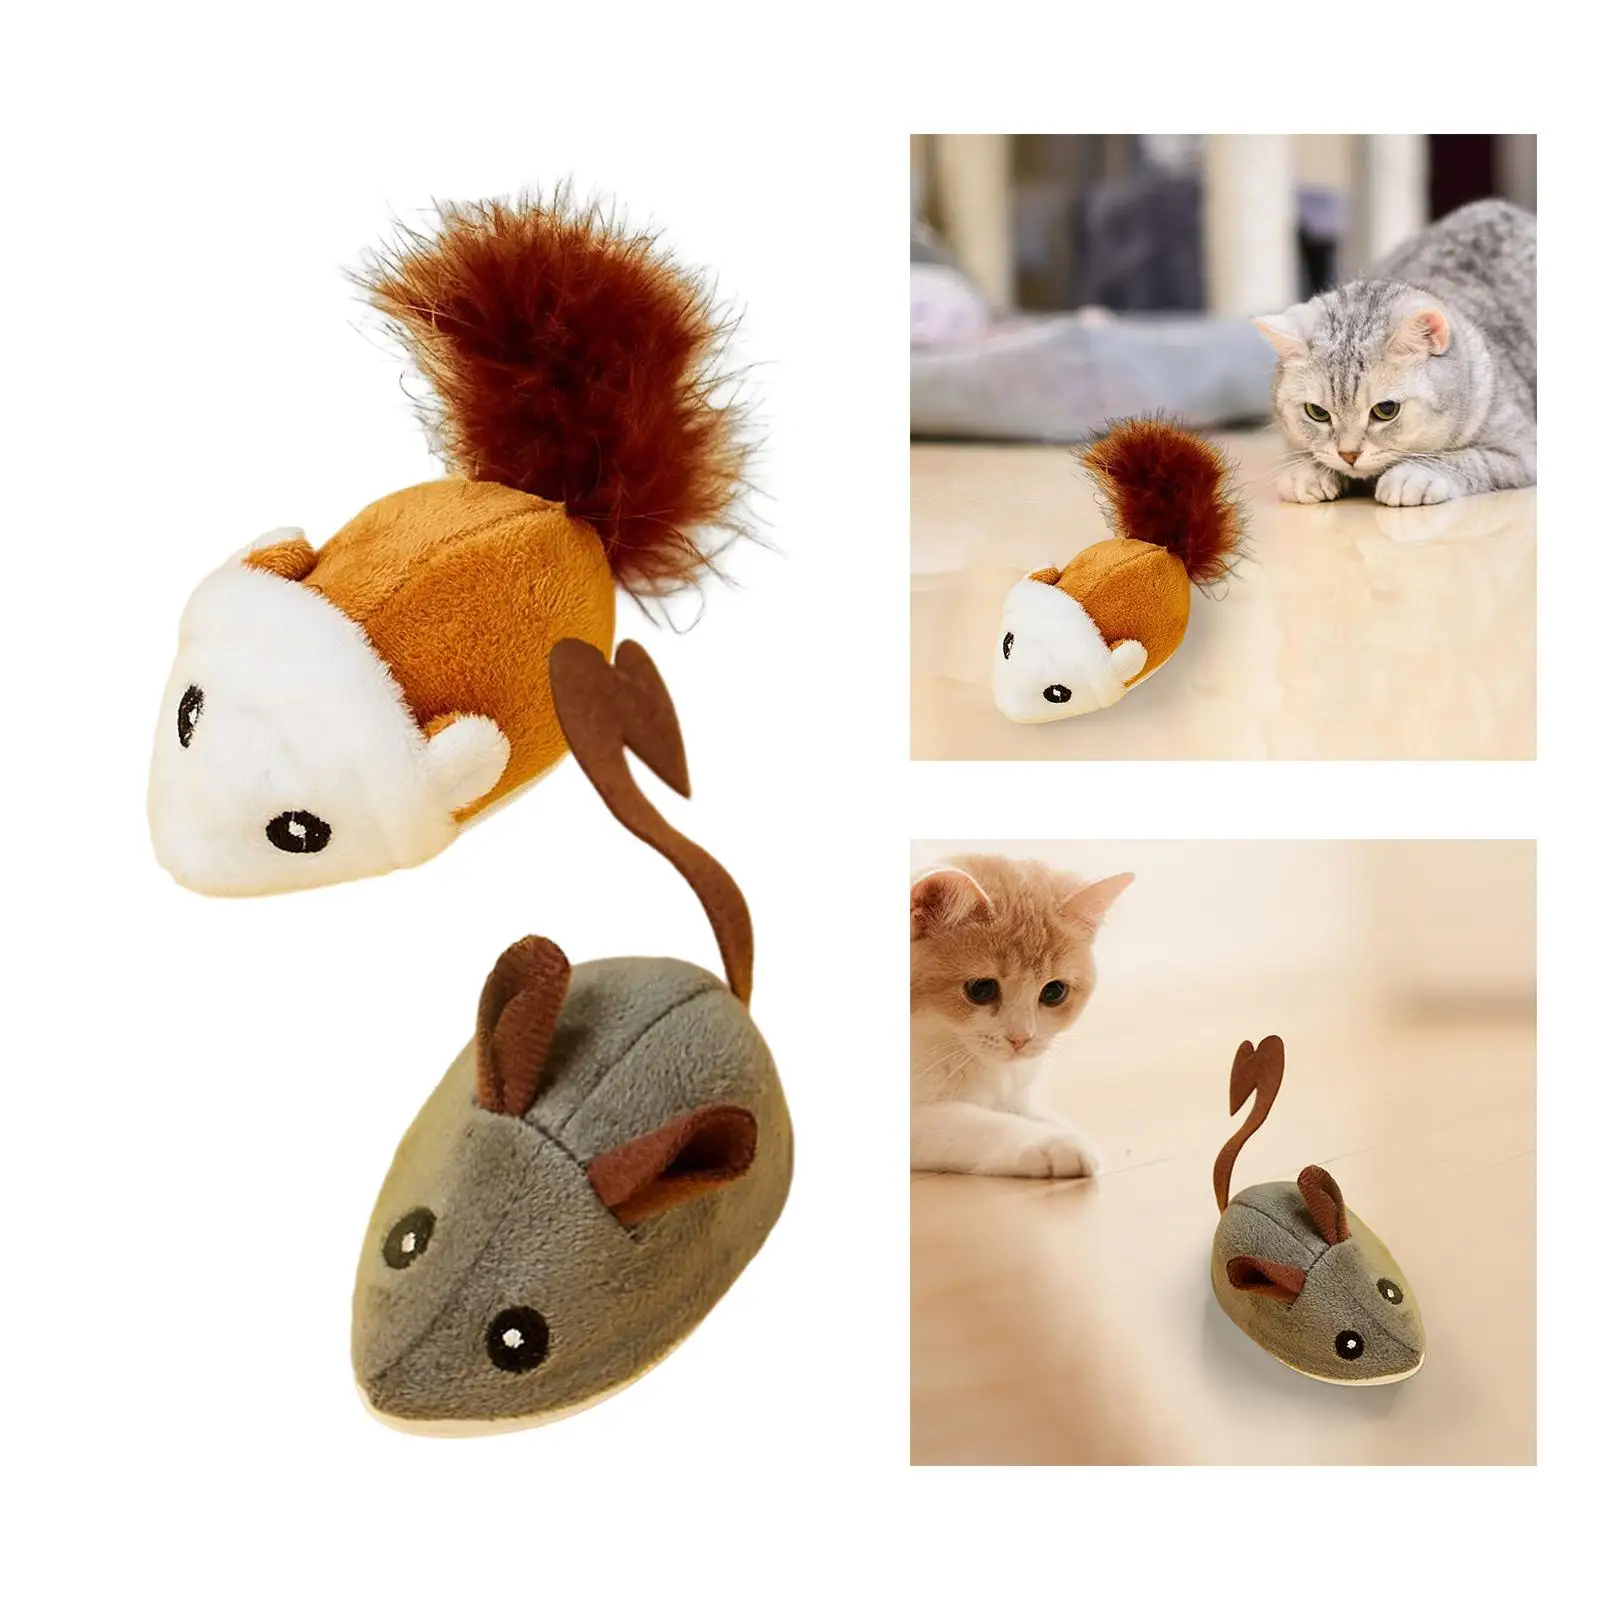 Plush Toys Electric Moving Soft Realistic Furry Plush Cat Toy for Cats Kitten Indoor